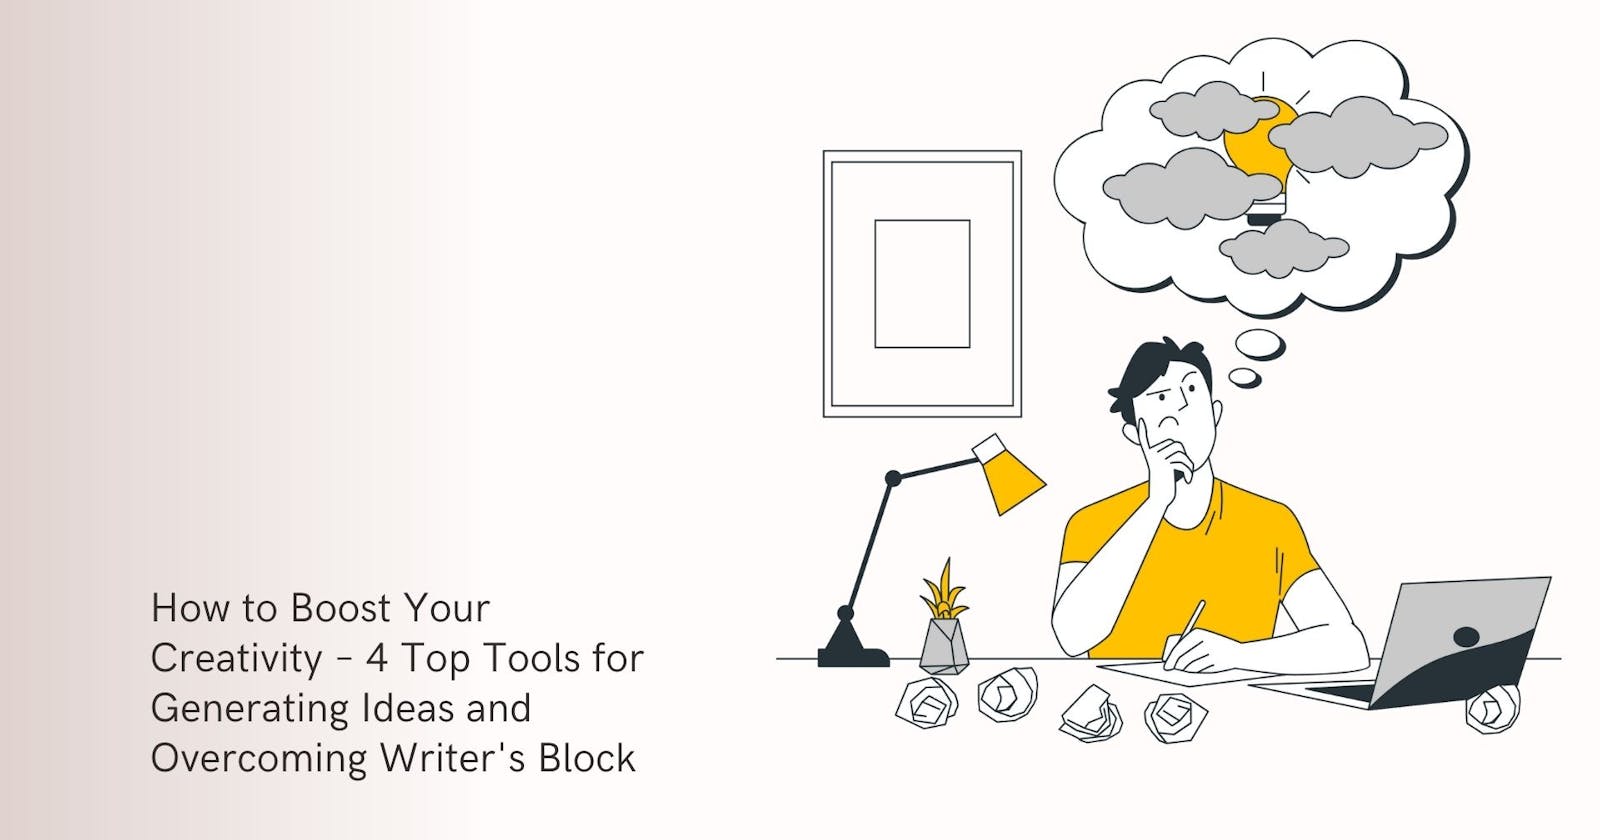 How to Boost Your Creativity – Strategies for Generating Ideas and Overcoming Writer's Block